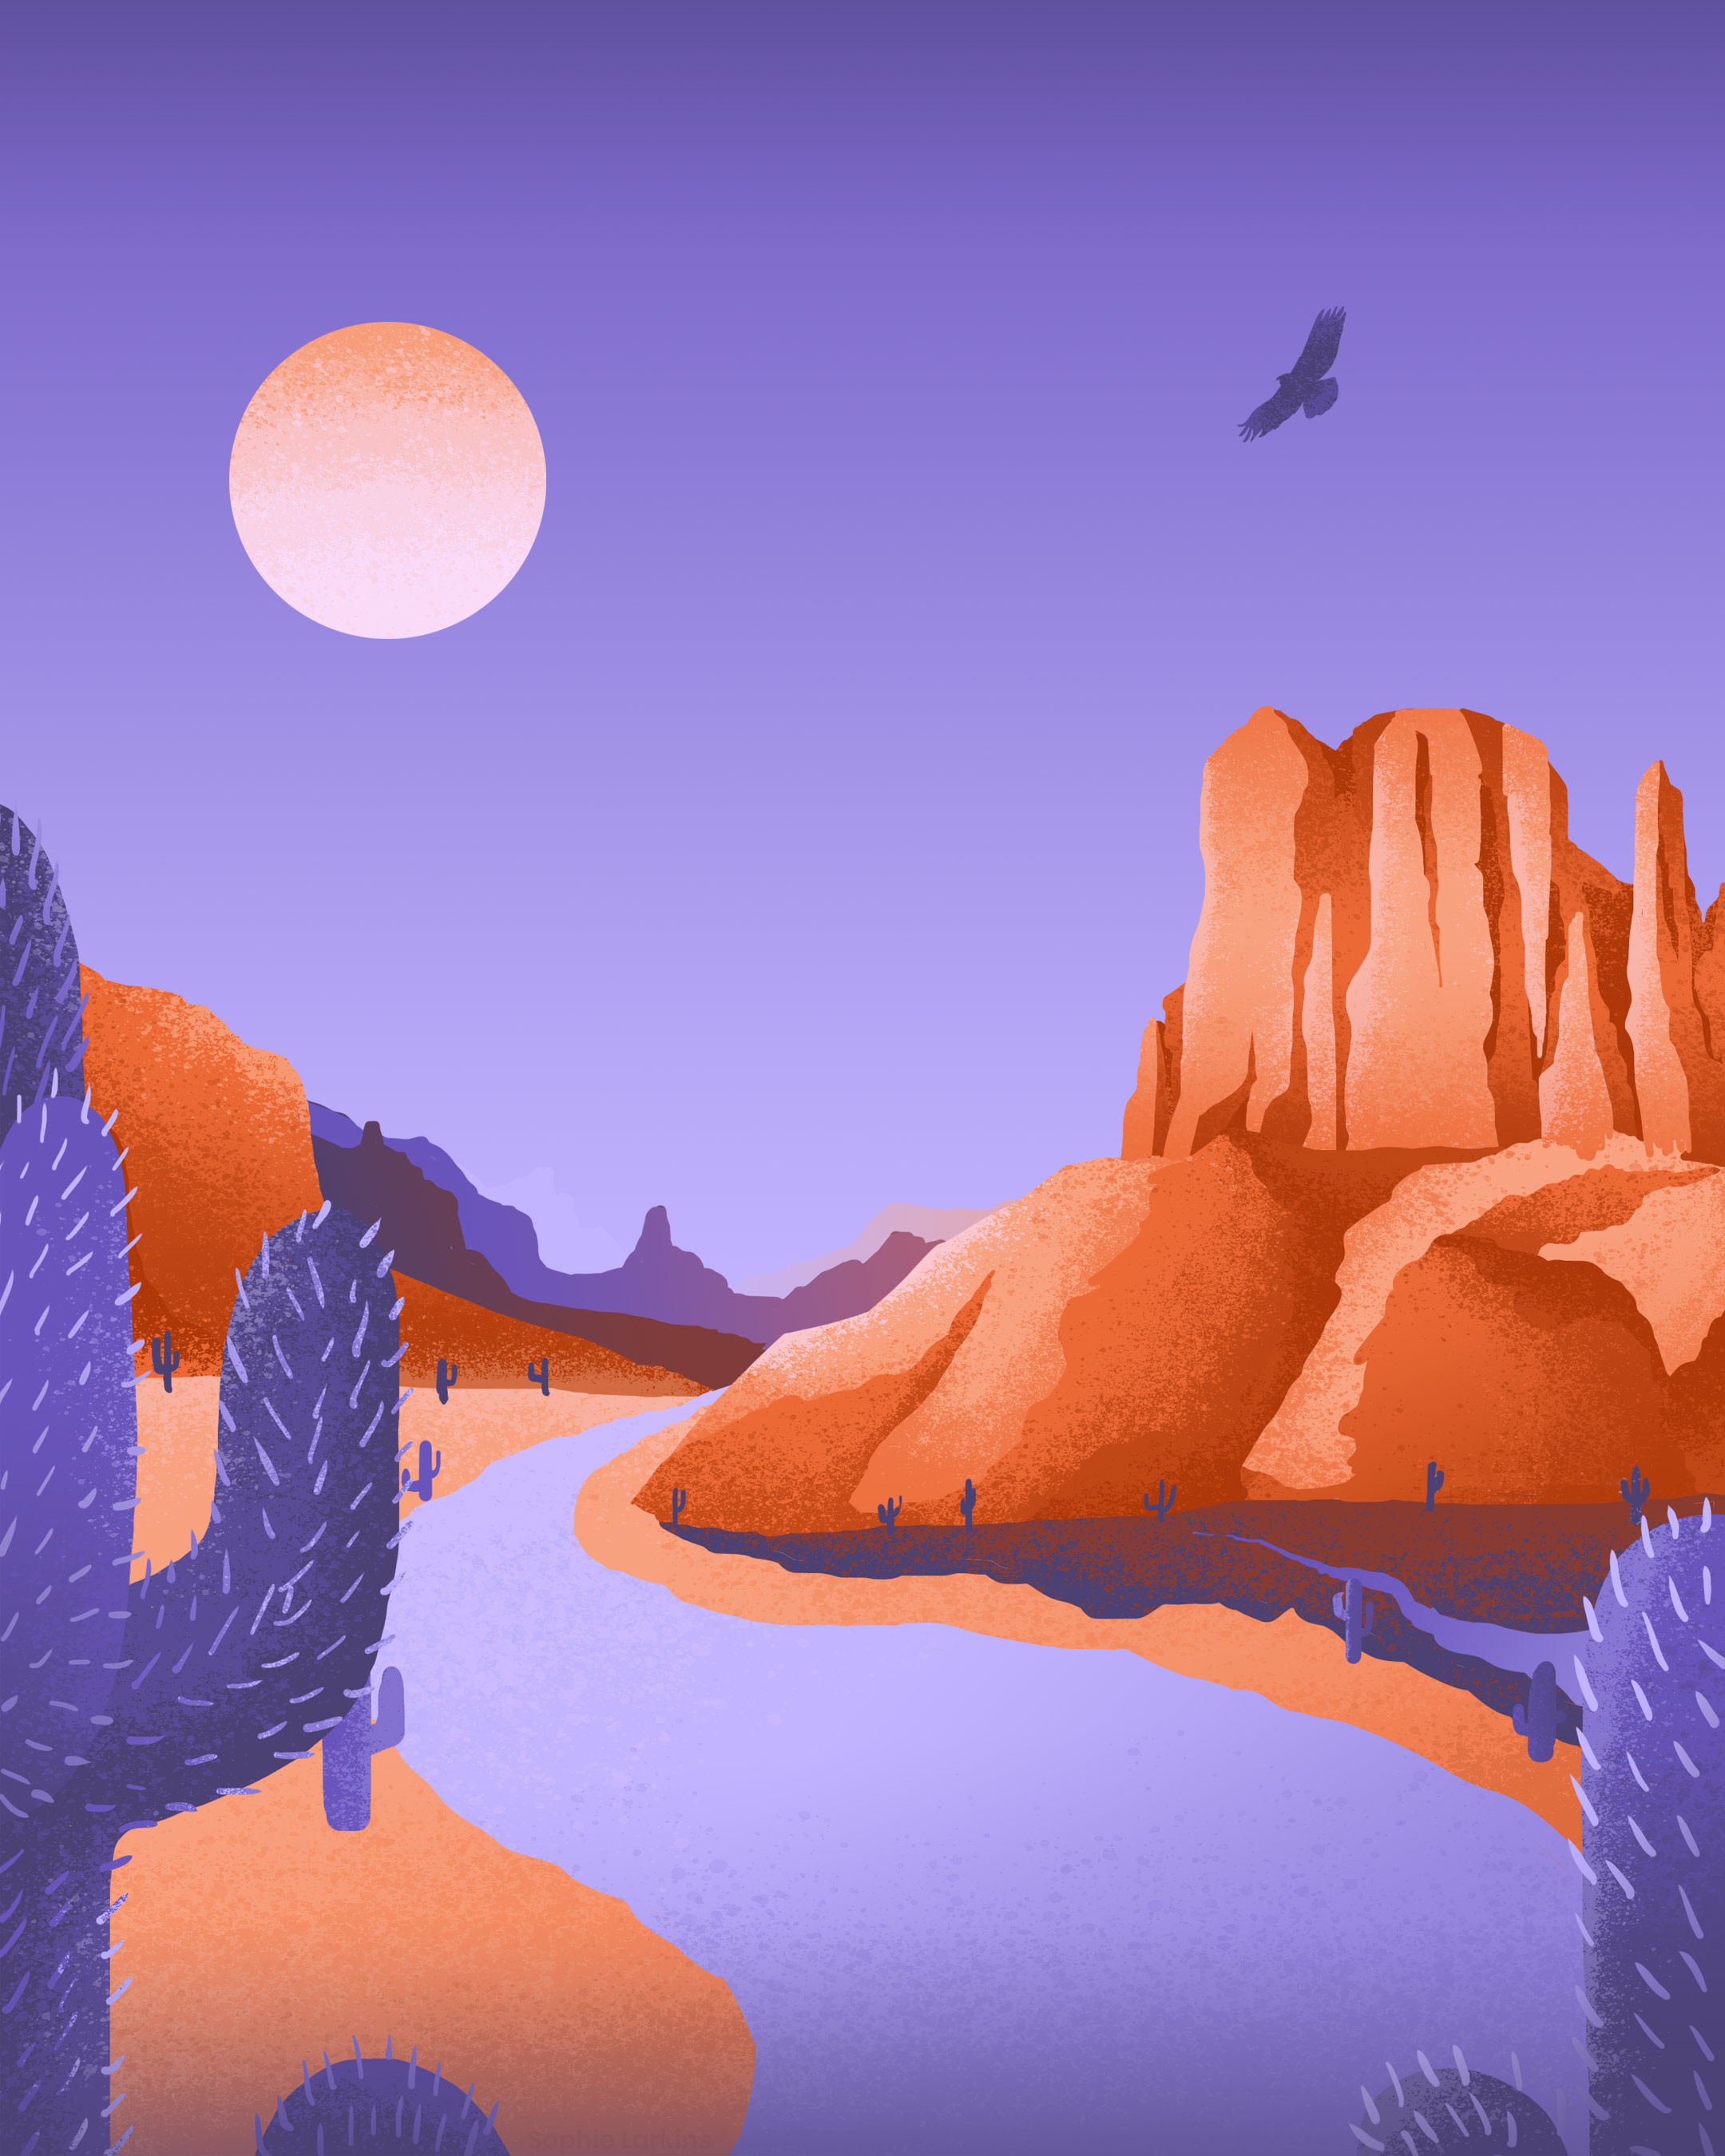 A Wild West desert landscape at sunset with Saguaro cacti, a swooping Eagle, orange rock formations, a purple sky and a yellow sun